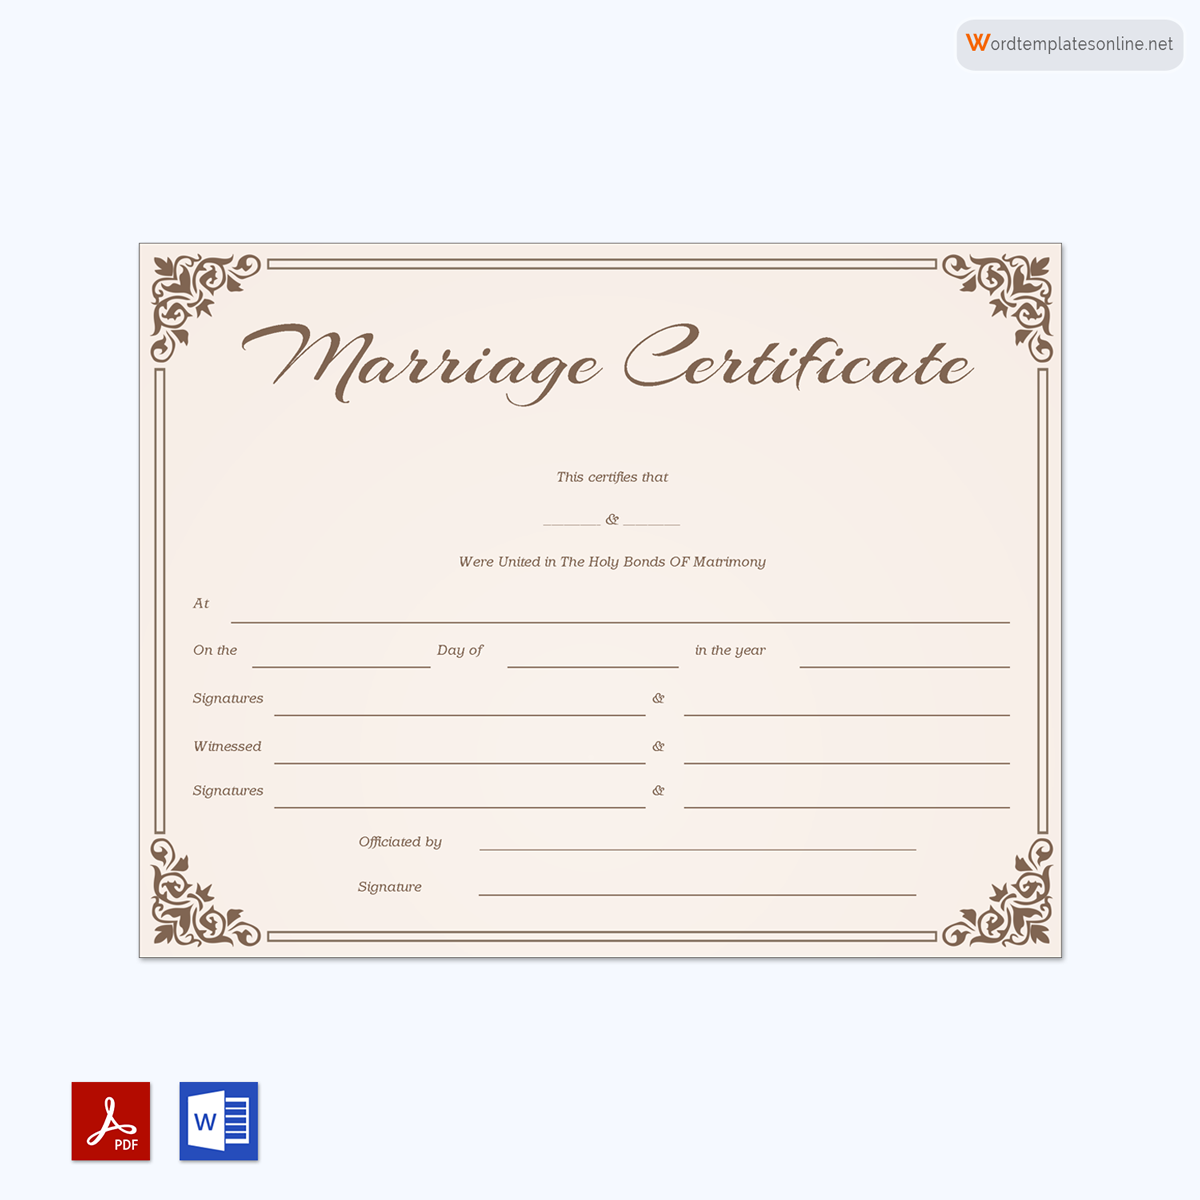  marriage certificate pdf download 1921